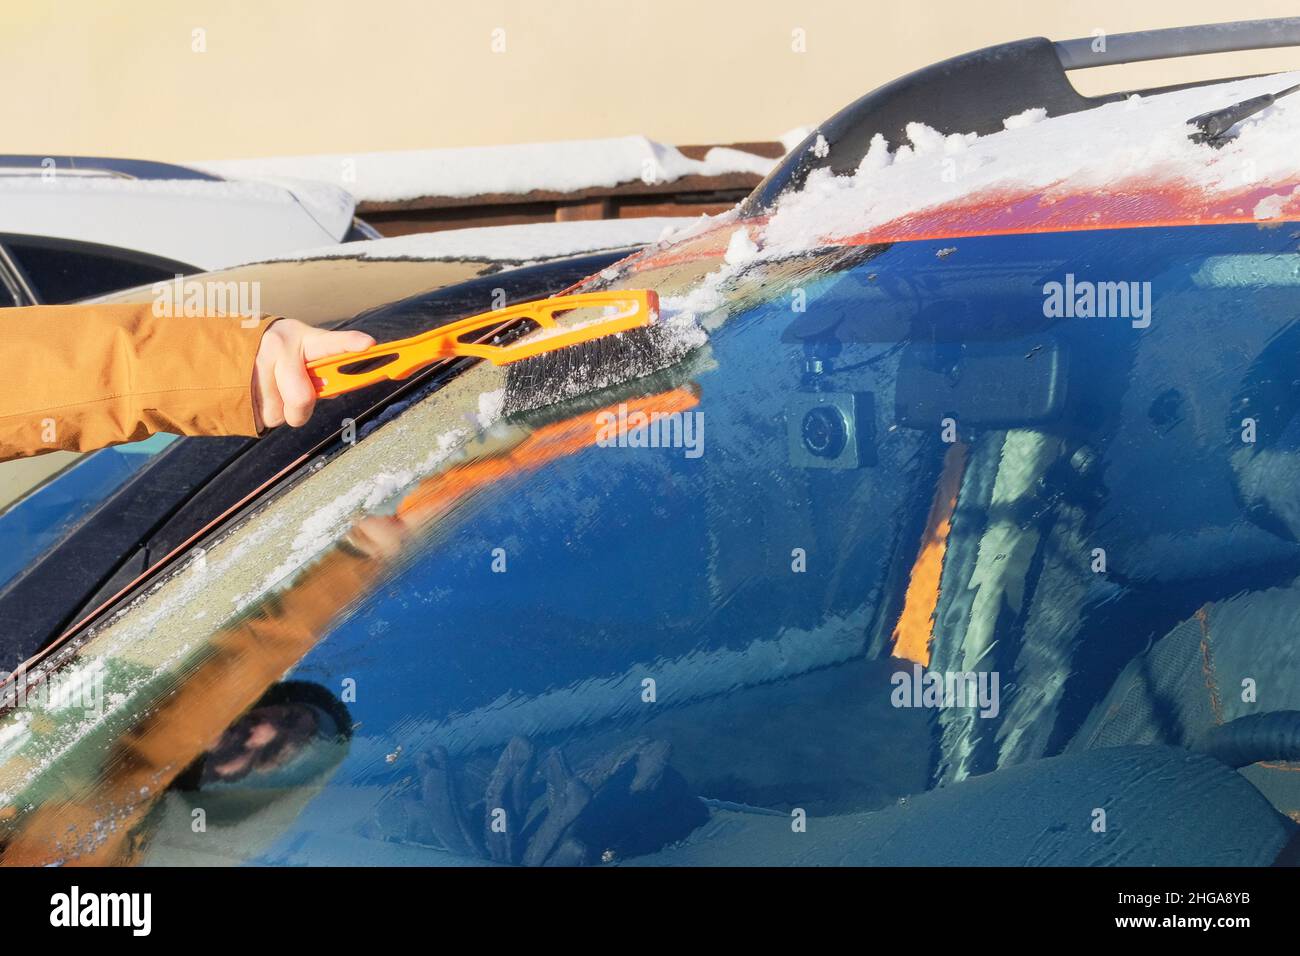 Man clears orange car from snow. Windshield of car. Brush in mans hand. Winter, snow, vehicle. Stock Photo